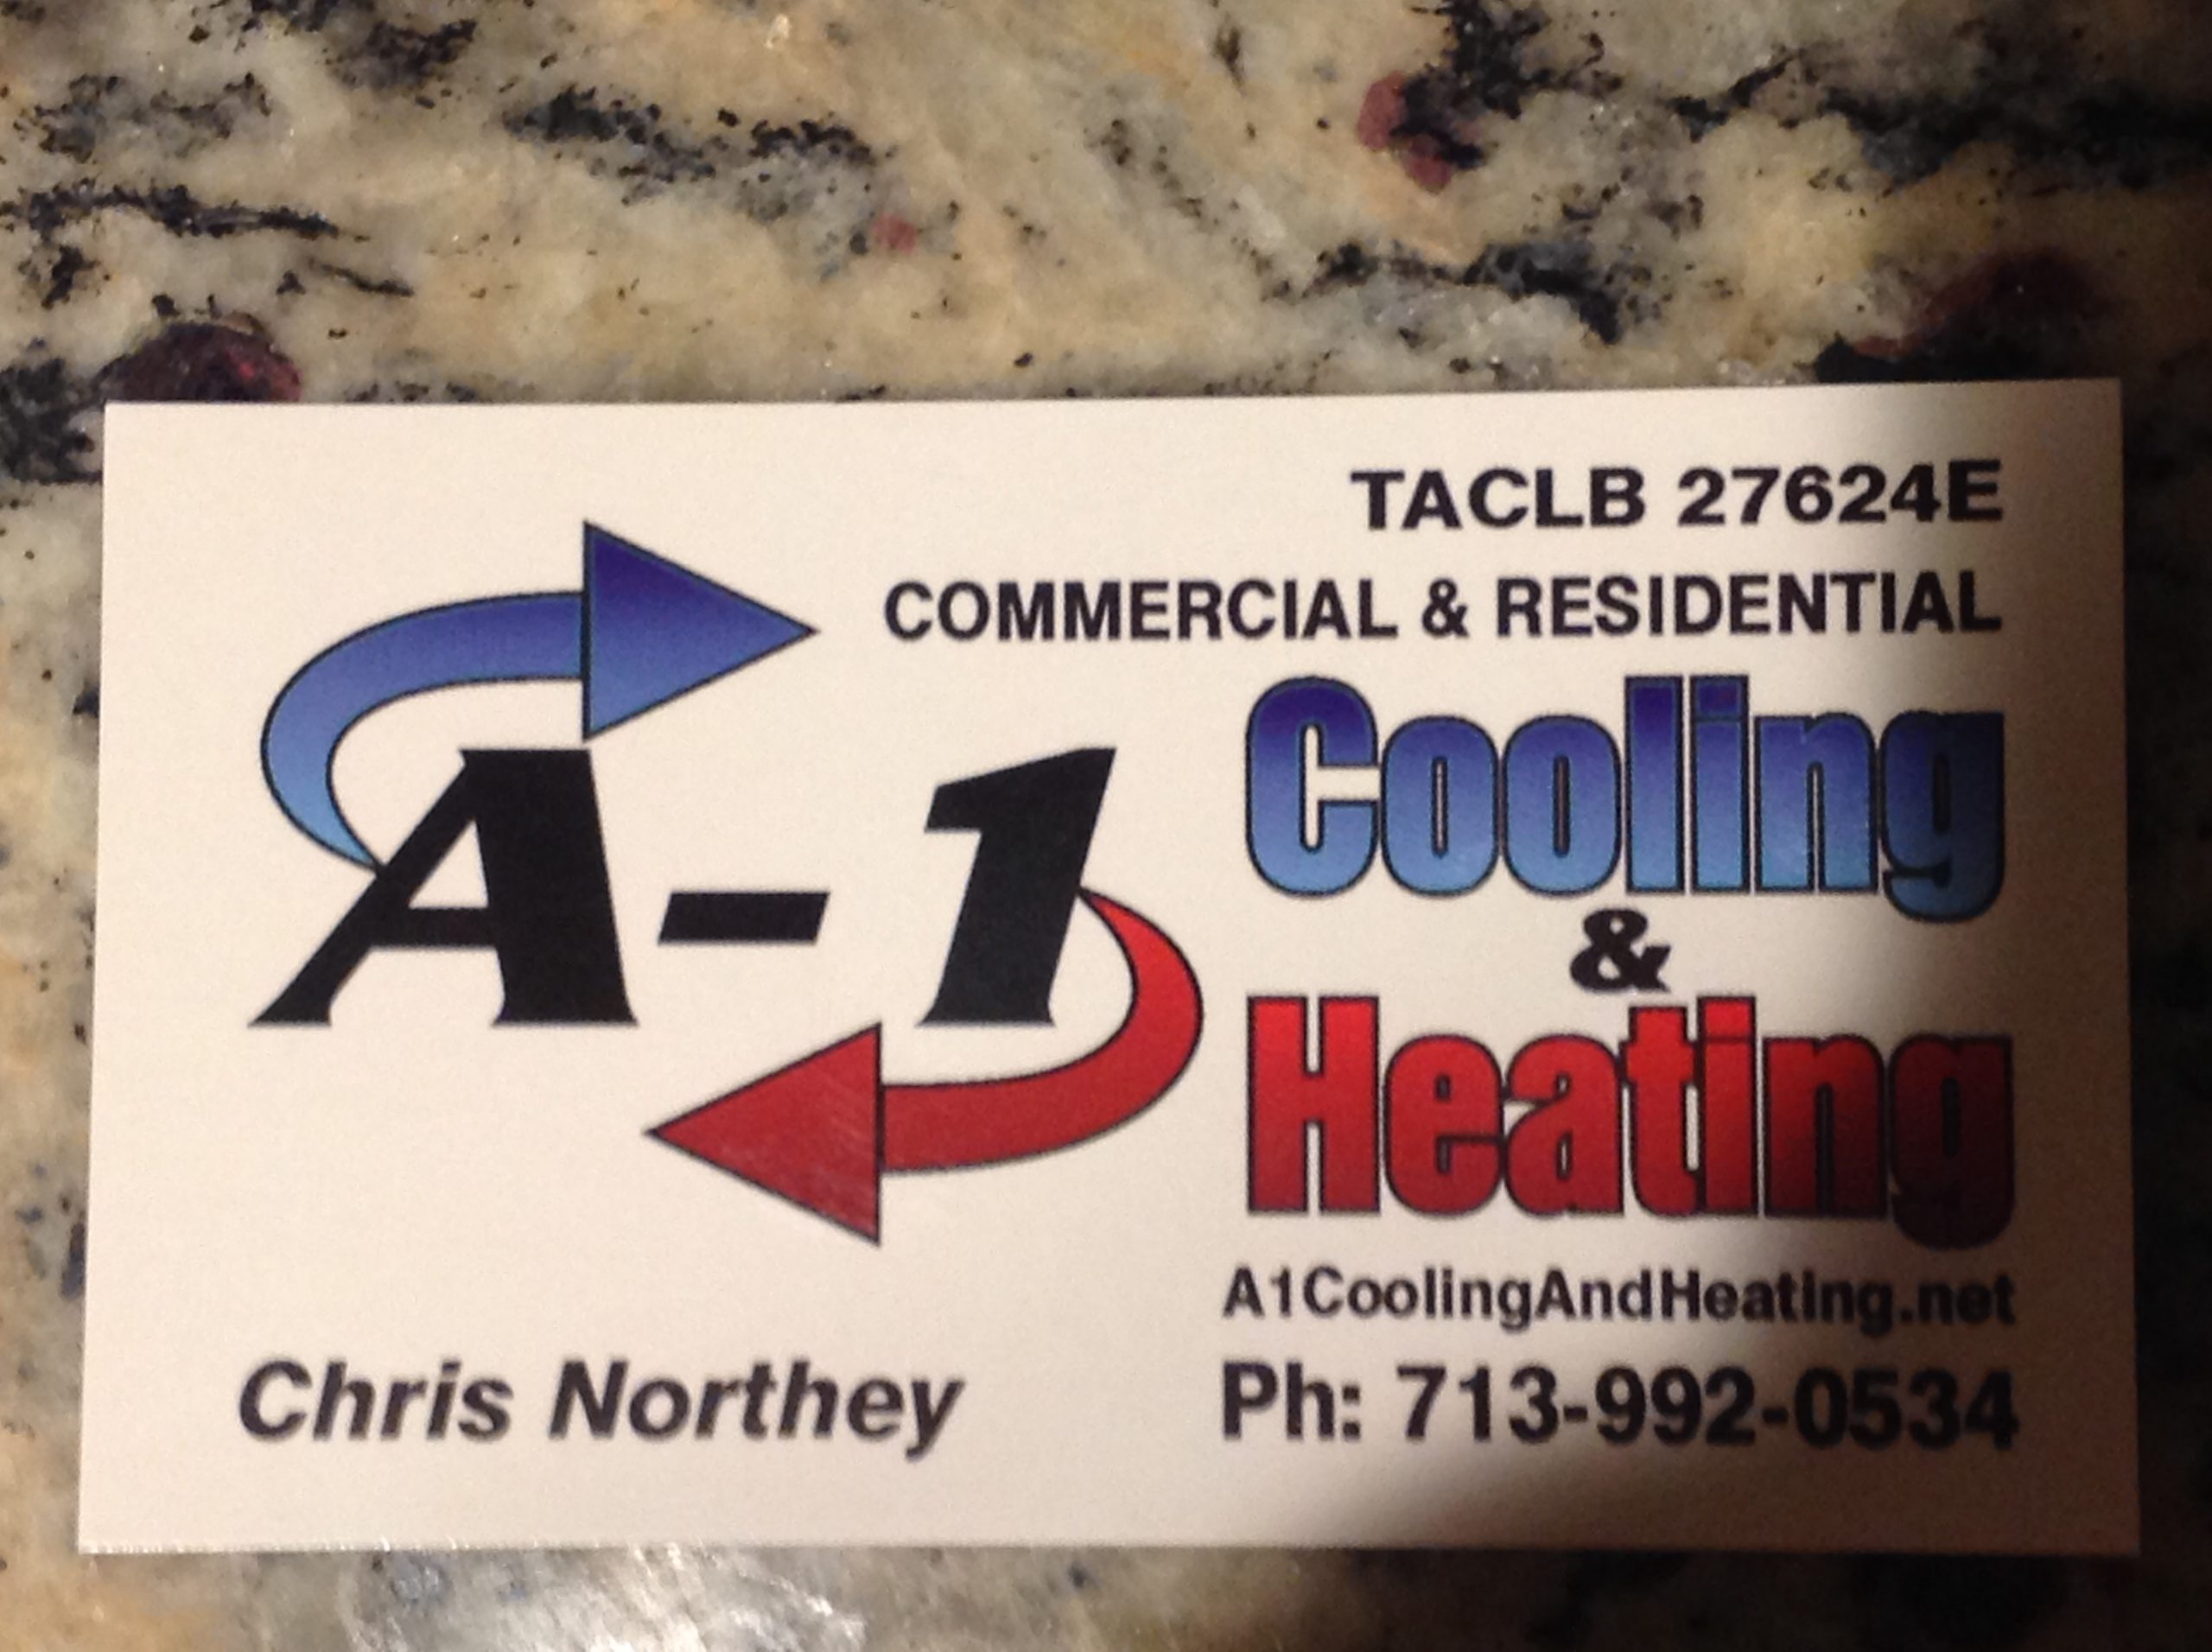 A1 cooling and heating - Local Contractor Near Me